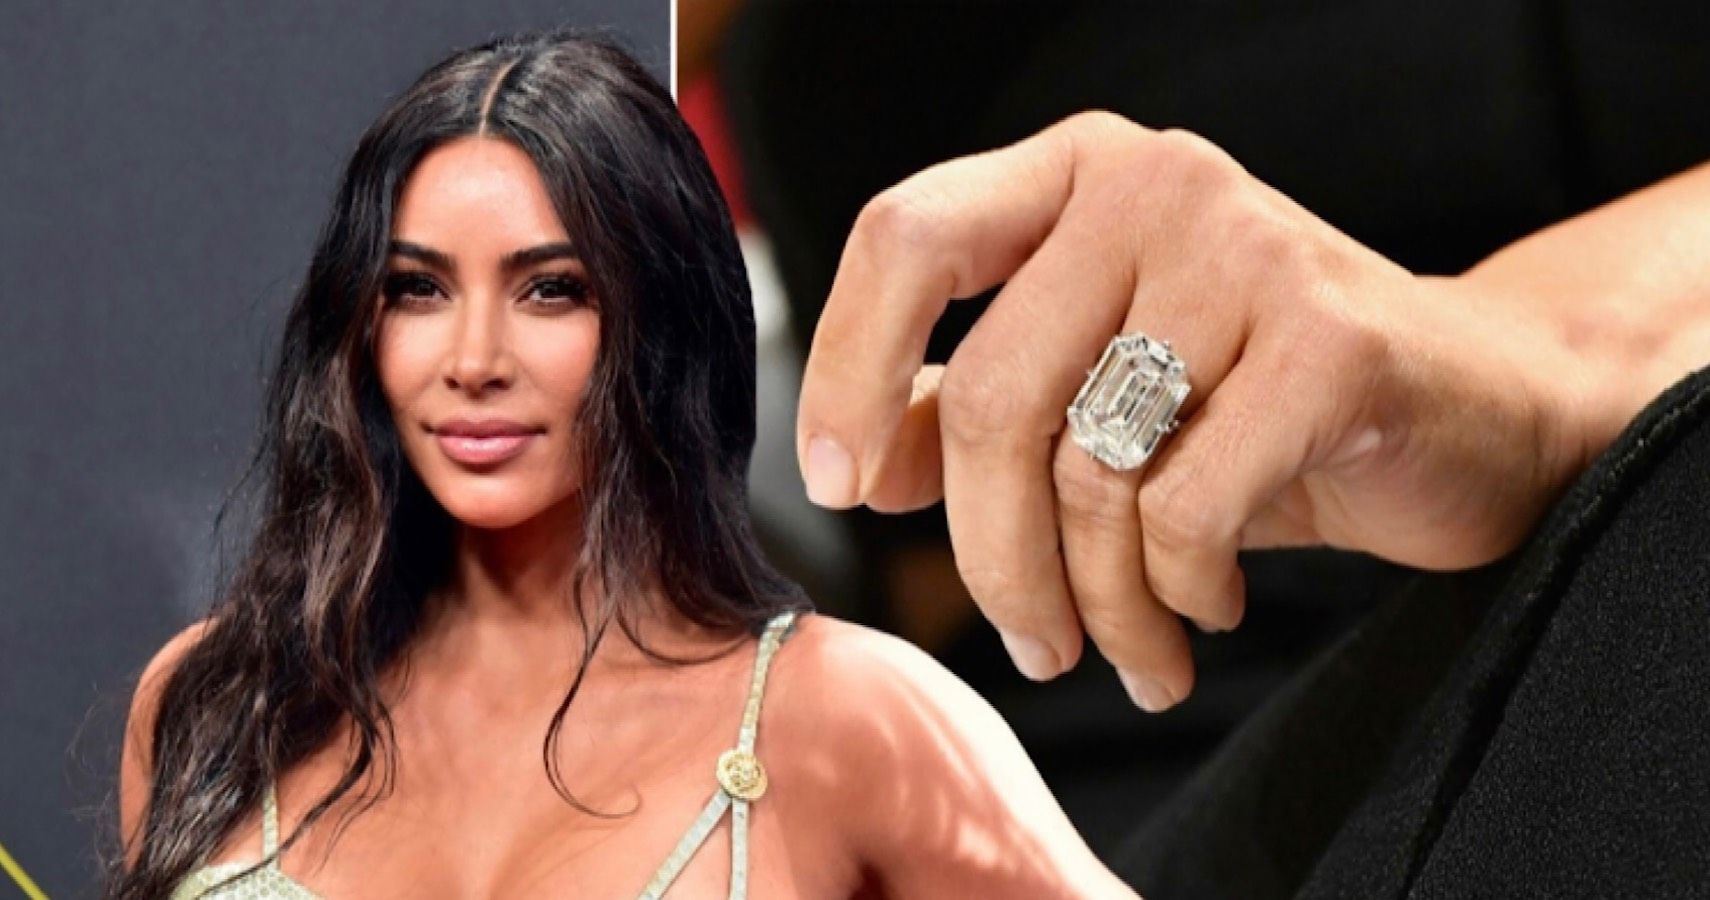 The Most Expensive Jewelry Owned By Kim Kardashian, Ranked